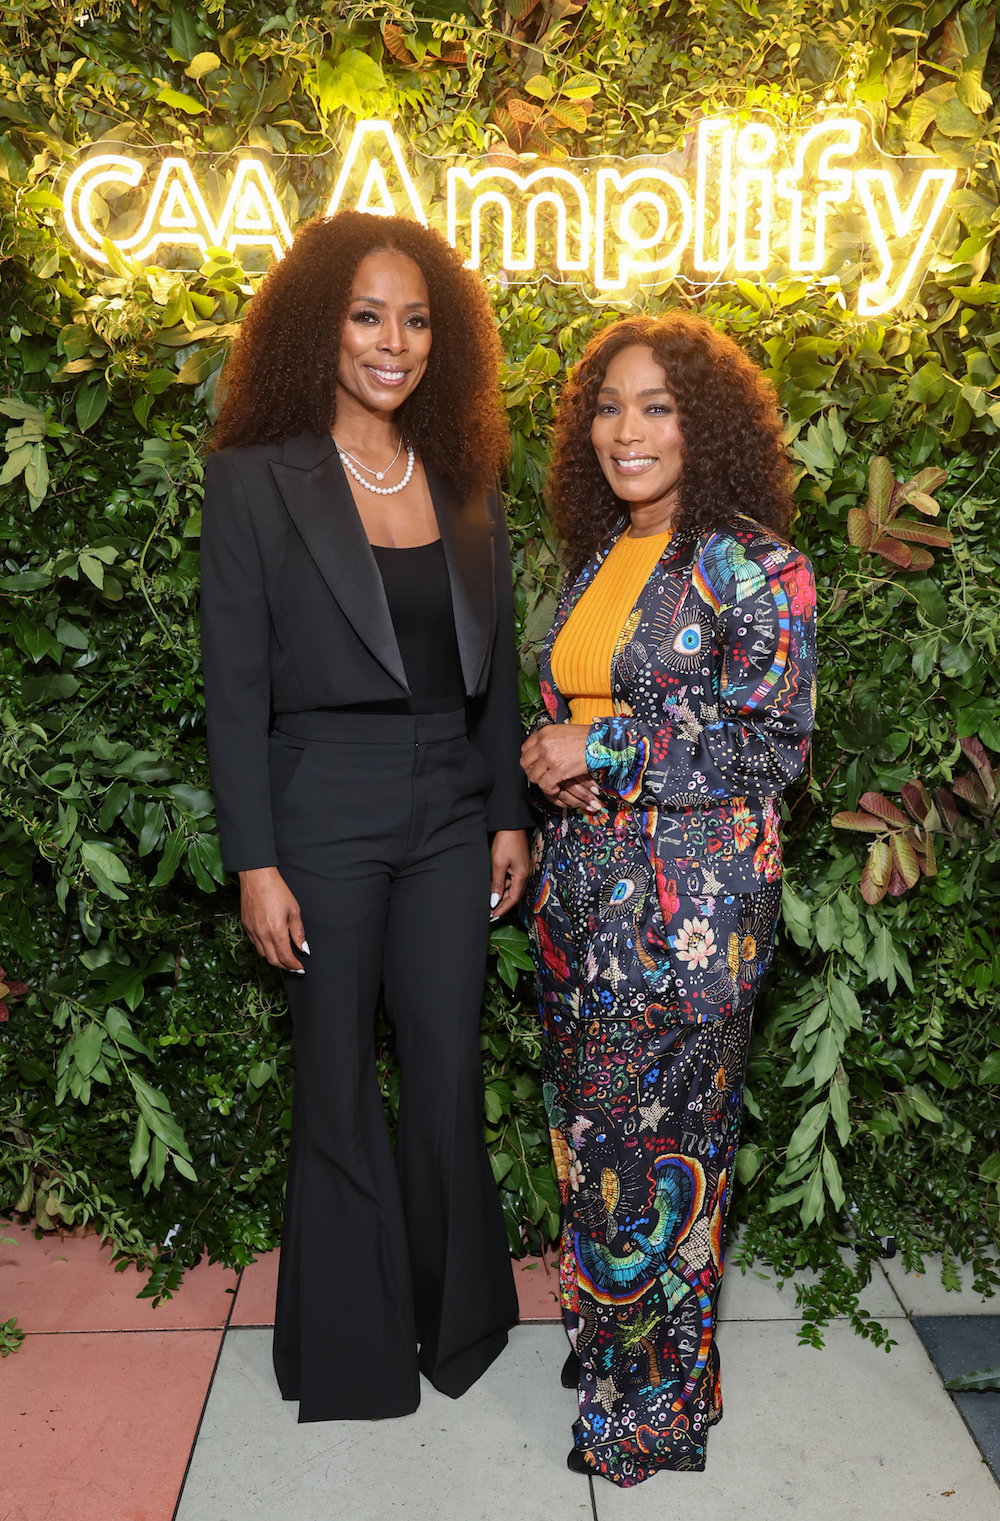 WEST HOLLYWOOD, CALIFORNIA - FEBRUARY 01: (L-R) Tasha Smith and Angela Bassett attend 2024 Celebration of Black Women in Entertainment hosted by CAA Amplify at Merois | West Hollywood on February 01, 2024 in West Hollywood, California. (Photo by Randy Shropshire/Getty Images for Creative Artists Agency )